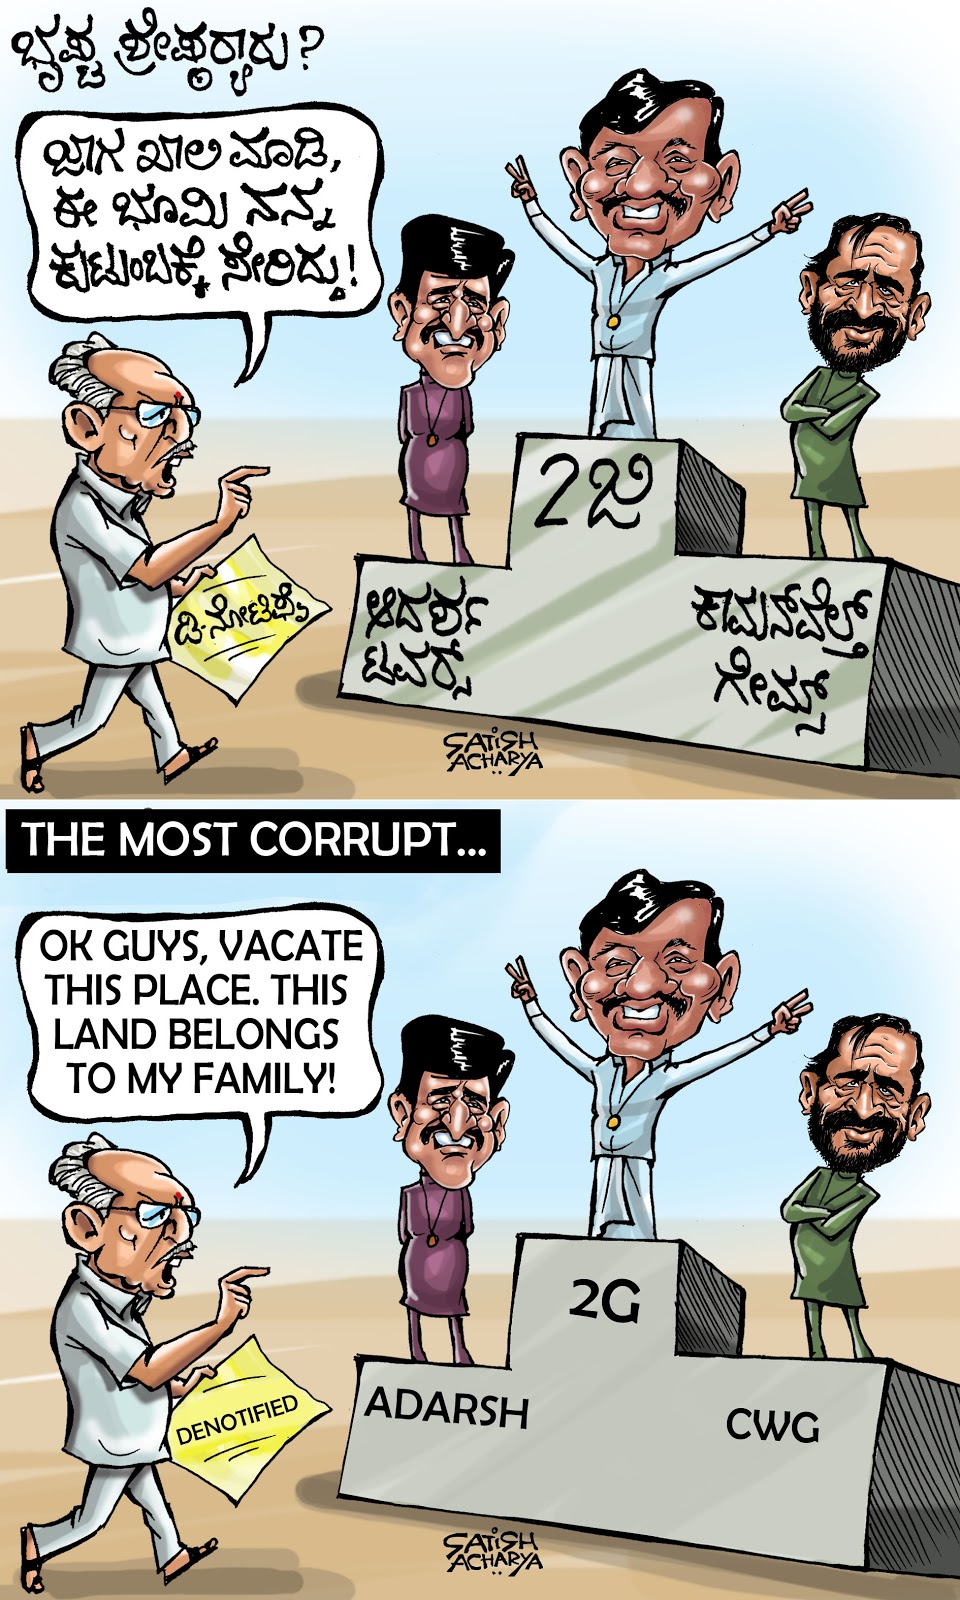 World of an Indian cartoonist!: Who's India's most corrupt?